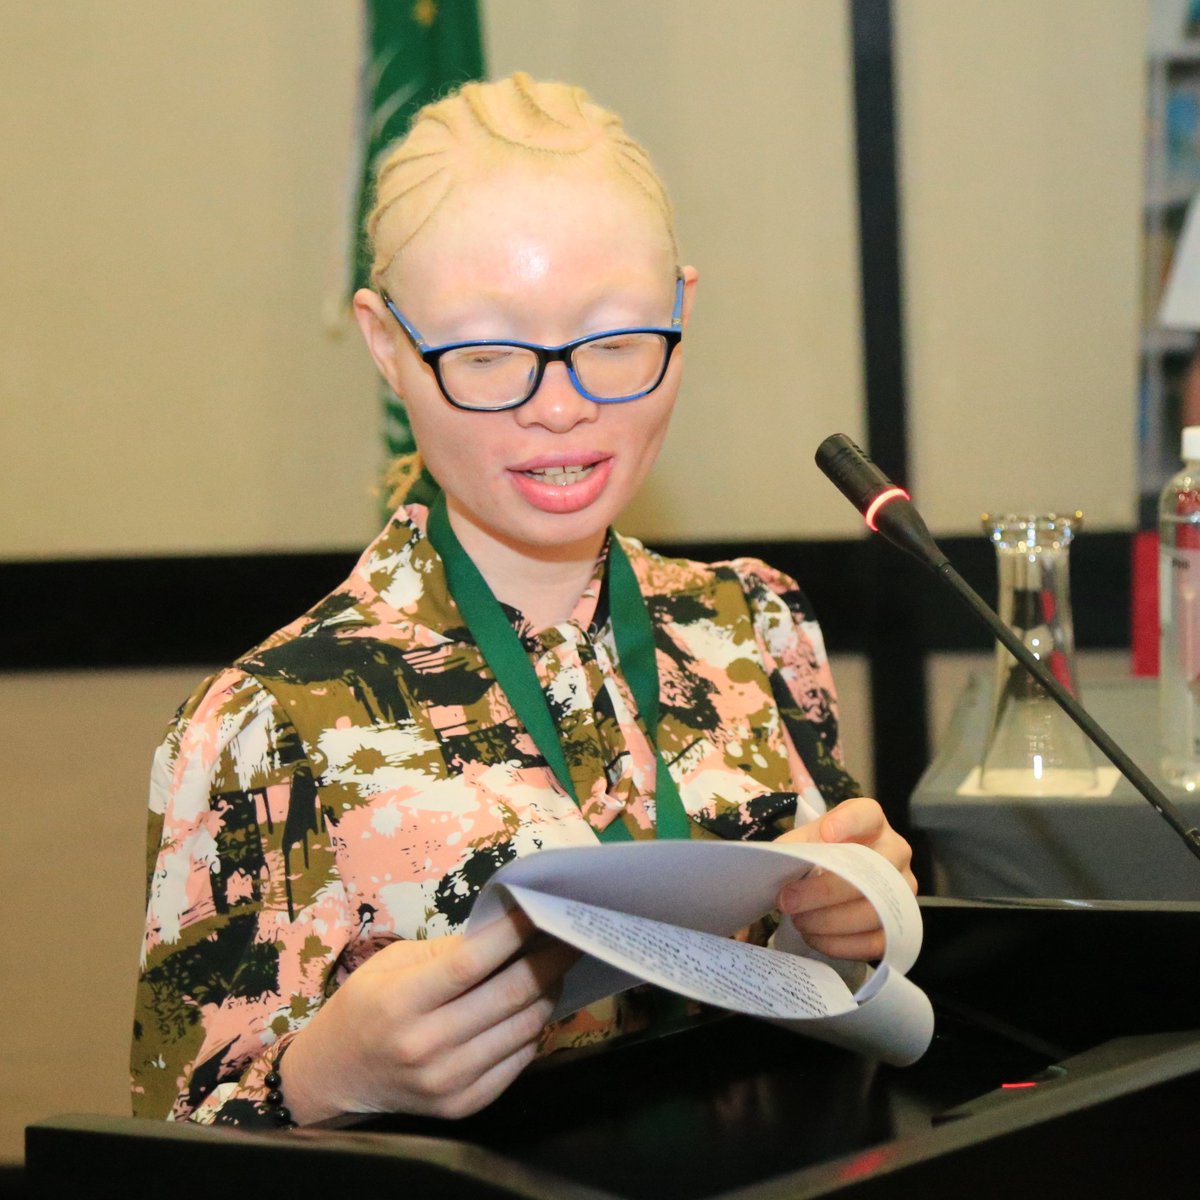 Tausi, 18 year old, is the only child with albinism in her family. She recounts he unique experience growing up, from educational challenges to bullying. She calls for inclusive classrooms. Every child deserves to enjoy the right to education without discrimination!